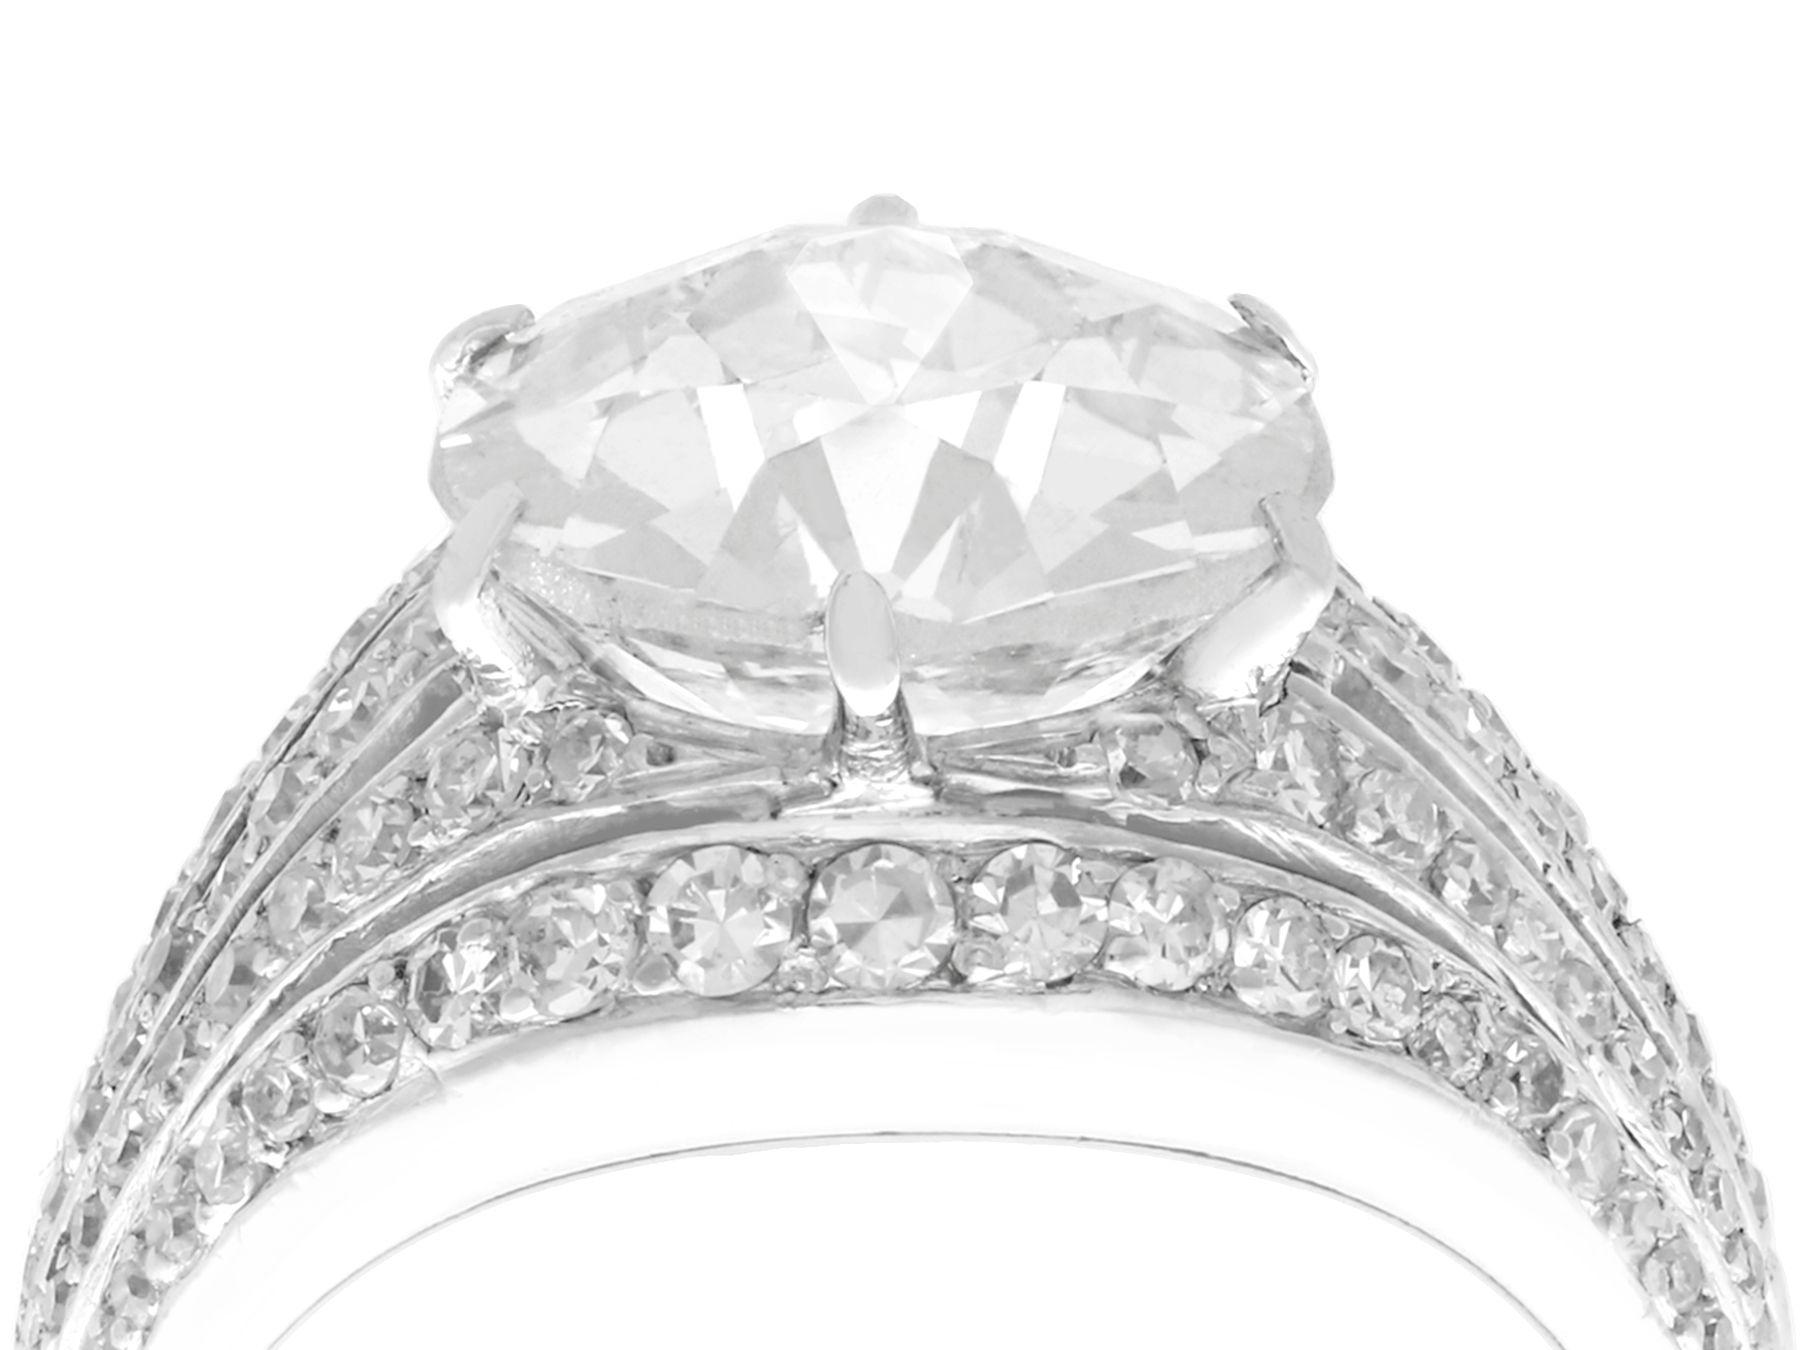 A stunning antique 3.98 carat diamond and platinum Art Deco engagement ring; part of our diverse antique jewelry and estate jewelry collections.

This stunning, fine and impressive antique diamond ring has been crafted in platinum.

The pierced